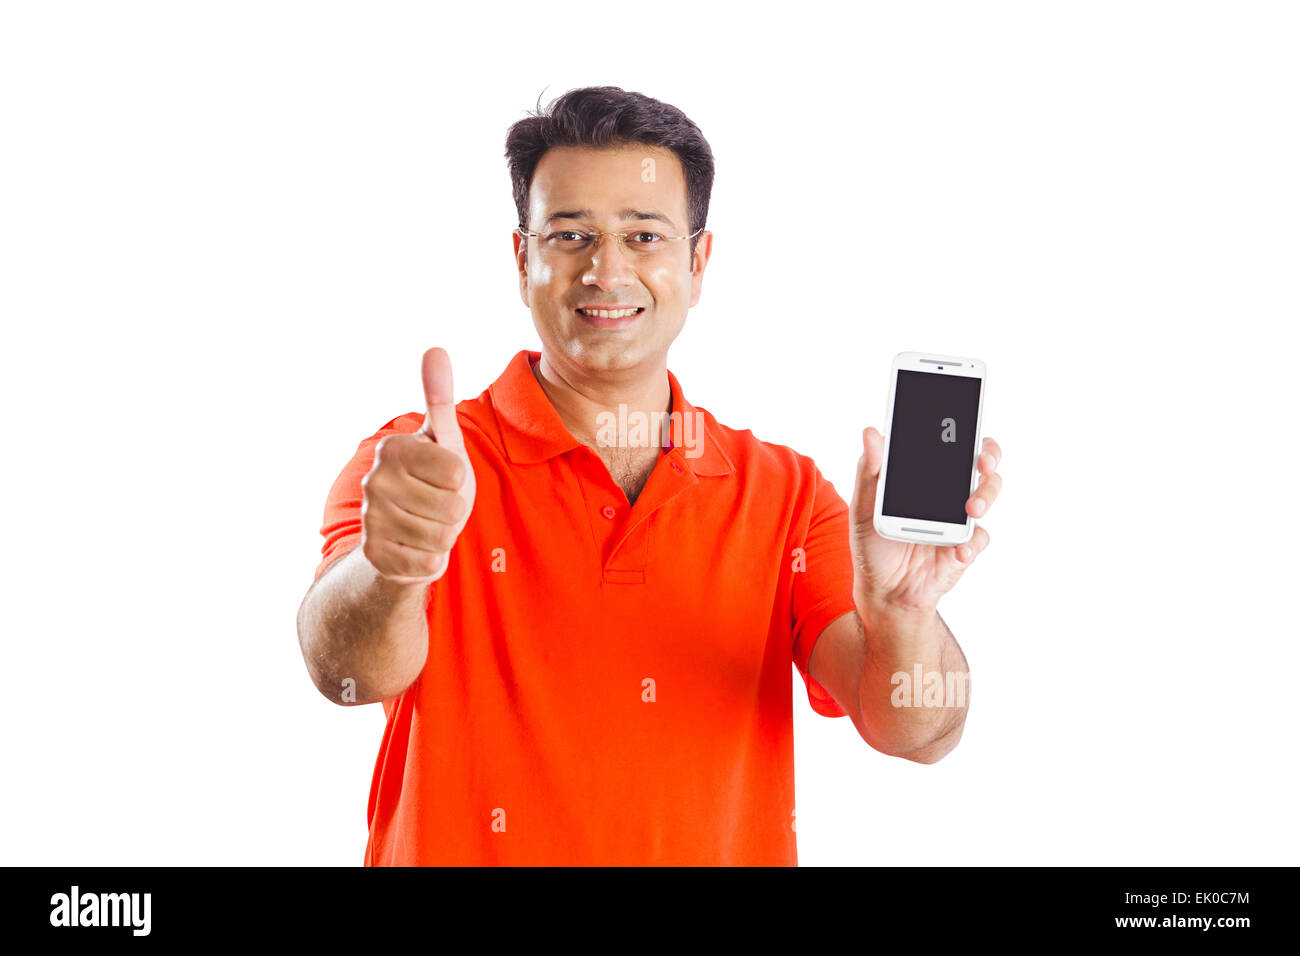 1 indian man Cell Phone Quality Stock Photo